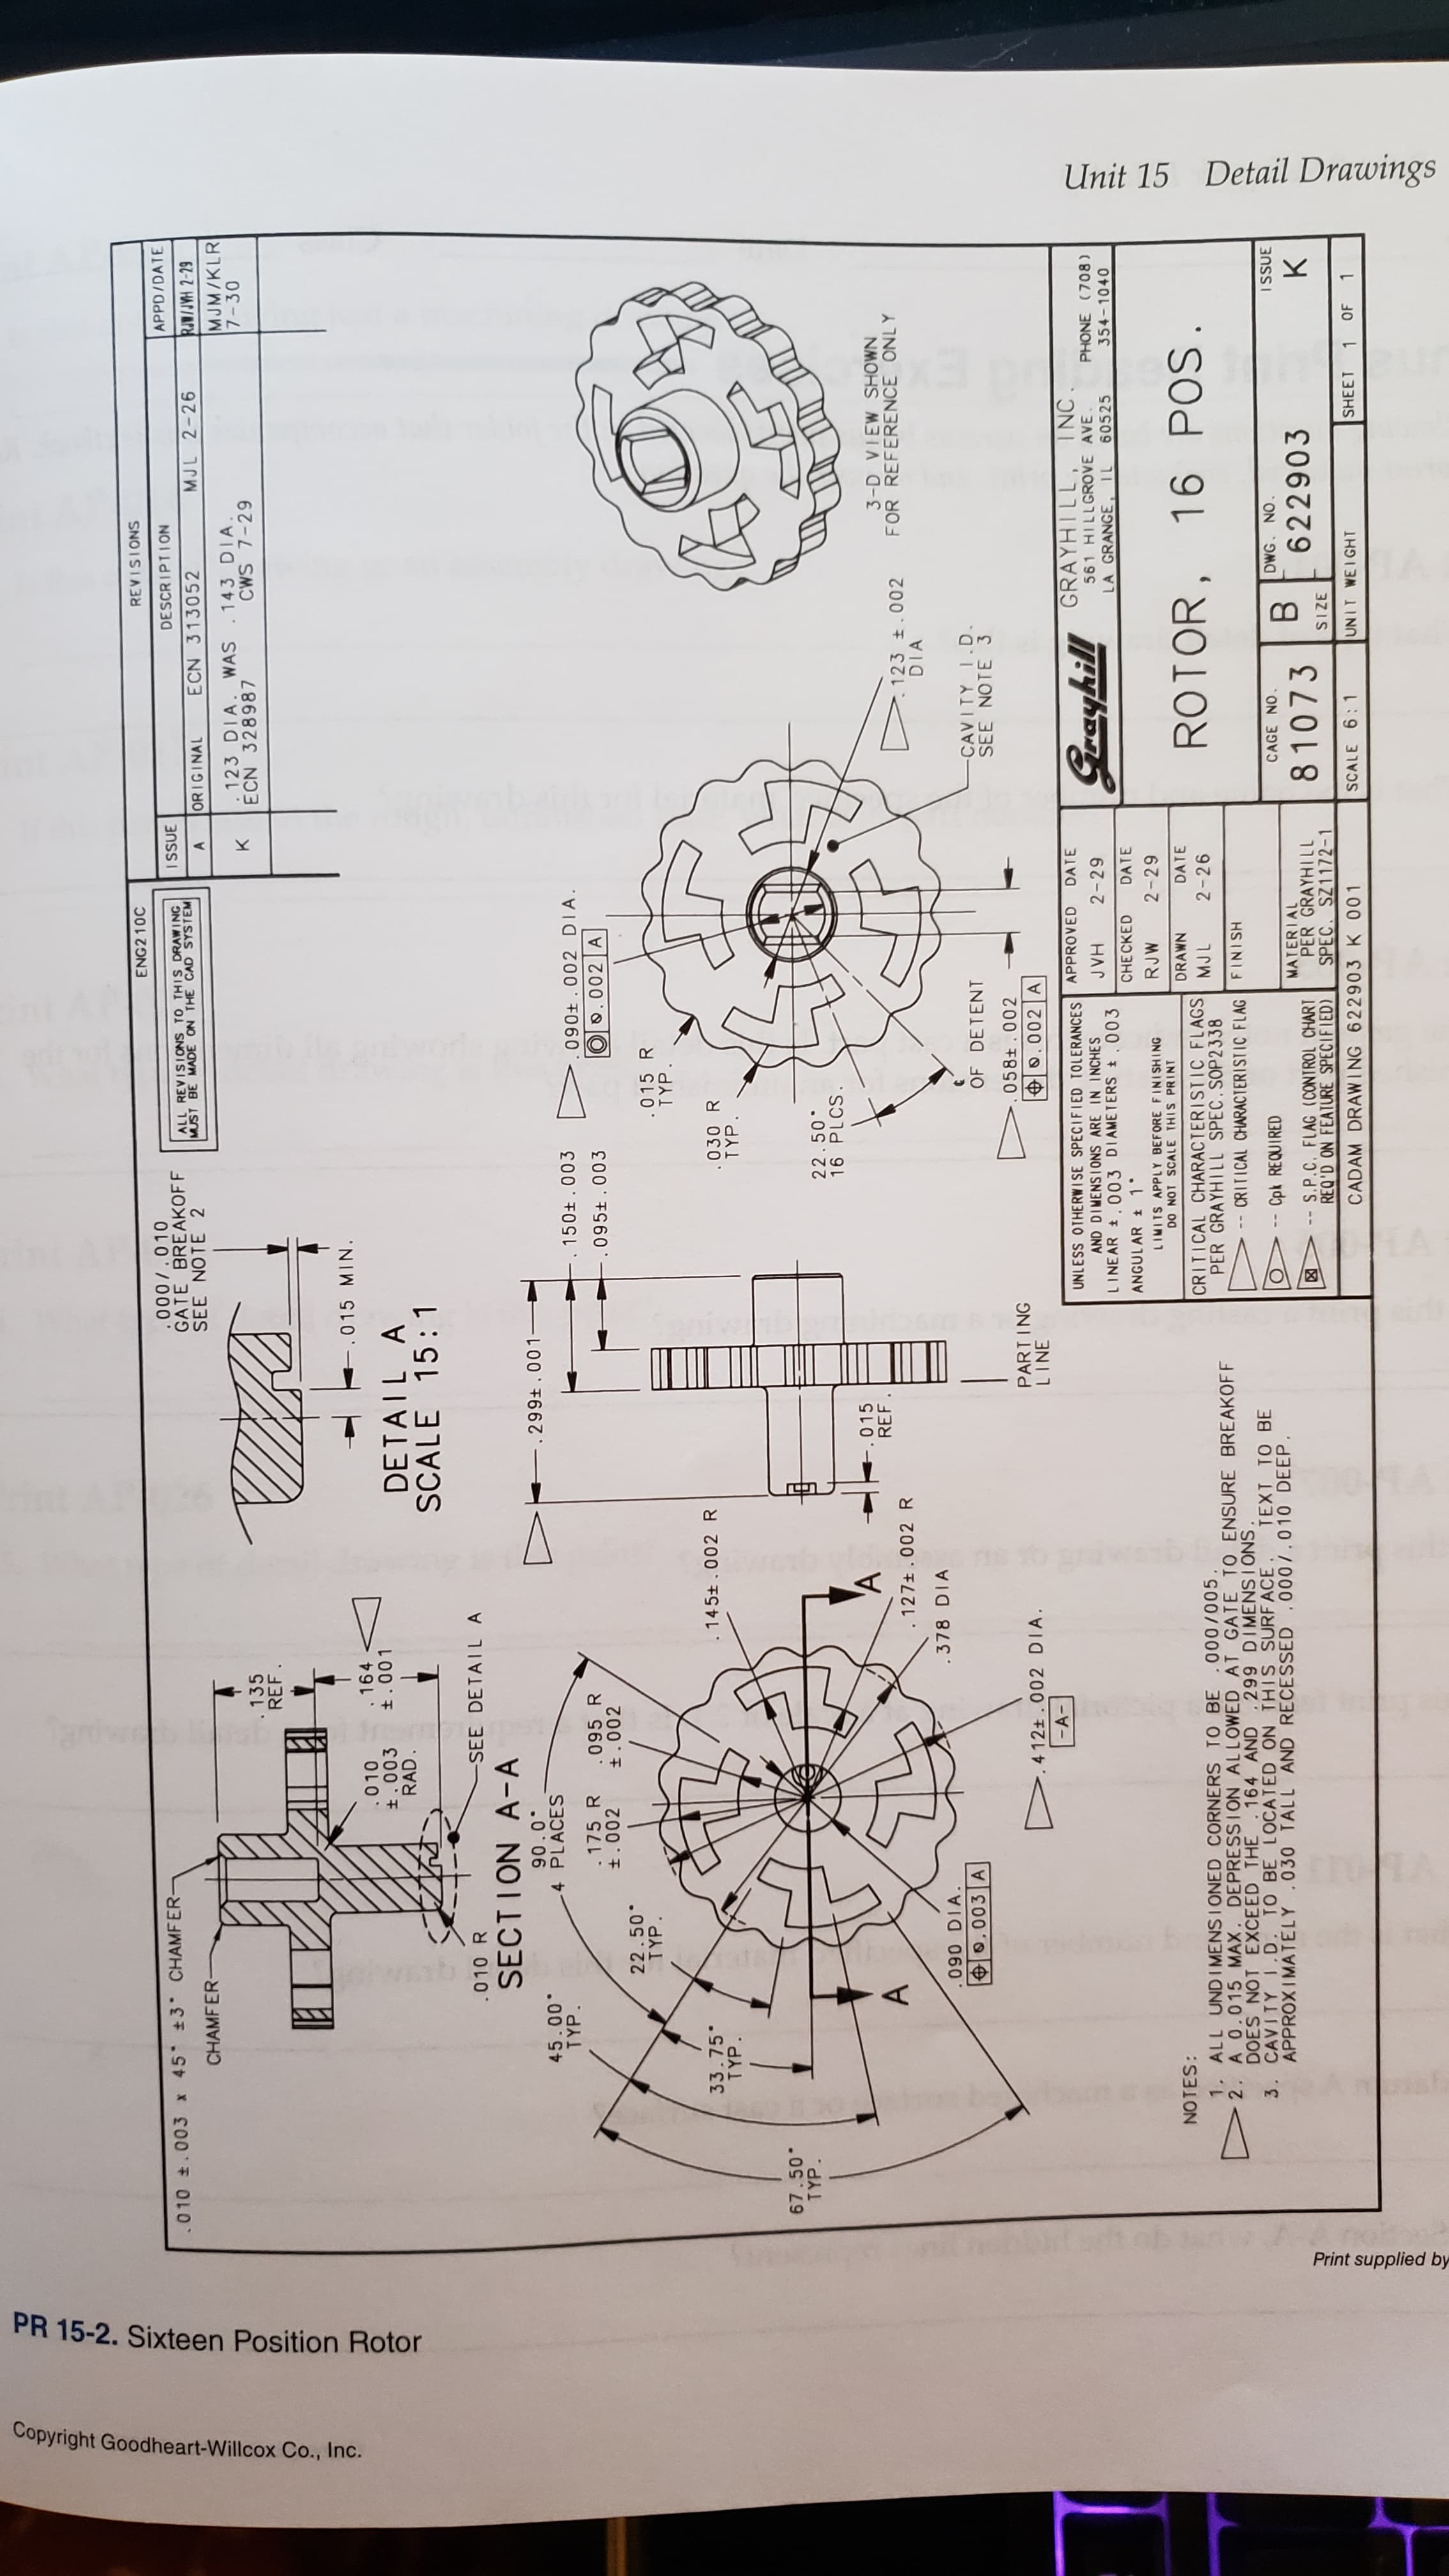 Detail Drawings
Unit 15
E
Print supplied by
PR 15-2. Sixteen Position Rotor
Copyright Goodheart-Willcox Co., Inc.
ENG2 10C
REVISIONS
.000/ .010
GATE BREAKOFF
SEE NOTE 2
.010 003 * 45 3 CHAMF ER-
SSUE
DESCRIPTION
APPD/DATE
ALL REVISI ONS TO THIS DRAWING
MUST BE MADE ON THE CAD SYSTEM
RW/JVH 2-29
MJM/KLR
7-30
CHAMFER-
A
OR IGINAL
ECN 313052
MJL 2-26
.135
REF.
.123 DIA. WAS 143 DIA
ECN 328987
CWS 7-29
-. 015 MIN.
.164
.010
t .003 +.001
RAD.
DETAIL A
SCALE 15 1
.010 R
-SEE DETAILA
SECTION A-A
.00 40
TYP.
90.0
.4 PLACES
.150+.003
.175 R .095 R
t.002
090 002 DIA
.002 A
+ .002
.095t .003
22.50
TYP
.015 R
TYP.
33.75
TYP.
.145+ .002 R
.030 R
TYP.
67.50
TYP.
22.50
16 PLCS.
-. 015
REF
A
3-D VIEW SHOWN
FOR REFERENCE ONLY
.127t .002 R
123 .002
DIA
.378 DIA
.090 DIA
.003 A
-CAV I TY 1.D.
SEE NOTE 3
OF DETENT
PART ING
LINE
.058+ . 002
.002 A
. 412t . 002 DIA.
-A-
GRAYHILL, INC
APPROVED
DATE
UNLESS OTHERWISE SPECIFIED TOLERANCES
AND DIMENSIONS ARE IN INCHES
LINEAR 003 DIAMETERS .003
ANGULAR 1
561 HILLGROVE AVE
PHONE (708)
HAT
CHECKED
2-29
LA GRANGE,
11
60525
354-1040
DATE
LIMITS APPLY BEFORE FINISHING
RJW
2-29
NOTES:
DO NOT SCALE THIS PRINT
910
ROTOR, 16 POS.
DRAWN
DATE
CRITICAL CHARACTERISTIC FLAGS
PER GRAYHILL SPEC.SOP2338
1. ALL UNDIMENS I ONED CORNERS TO BE .000 /005.
2. A 0.015 MAX. DEPRESSI ON ALLOWED AT GATE TO ENSURE BREAKOFF
DOES NOT EXCEED THE .164 AND .299 DIMENSIONS.
3. CAVITY I.D. TO BE LOCATED ON THIS SURFACE. TEXT TO BE
APPROXIMATELY .030 TALL AND RECESSED .000/.010 DEEP
MJL
2-26
CRITICAL CHARACTERISTIC FLAG FINISH
-- Cpk REQUIRED
CAGE NO
DWG
ISSUE
ON
MATERIAL
PER GRAYHILL
SPEC. SZ1172-1
81073
-- S.P.C. FLAG (CONTROL CHART
622903
X
REQ'D ON FEATURE SPECIFIED)
3ZIS
CADAM DRAWING 622903 K 001
SCALE 6:1
SHEET 1 OF 1
UNIT WEIGHT
